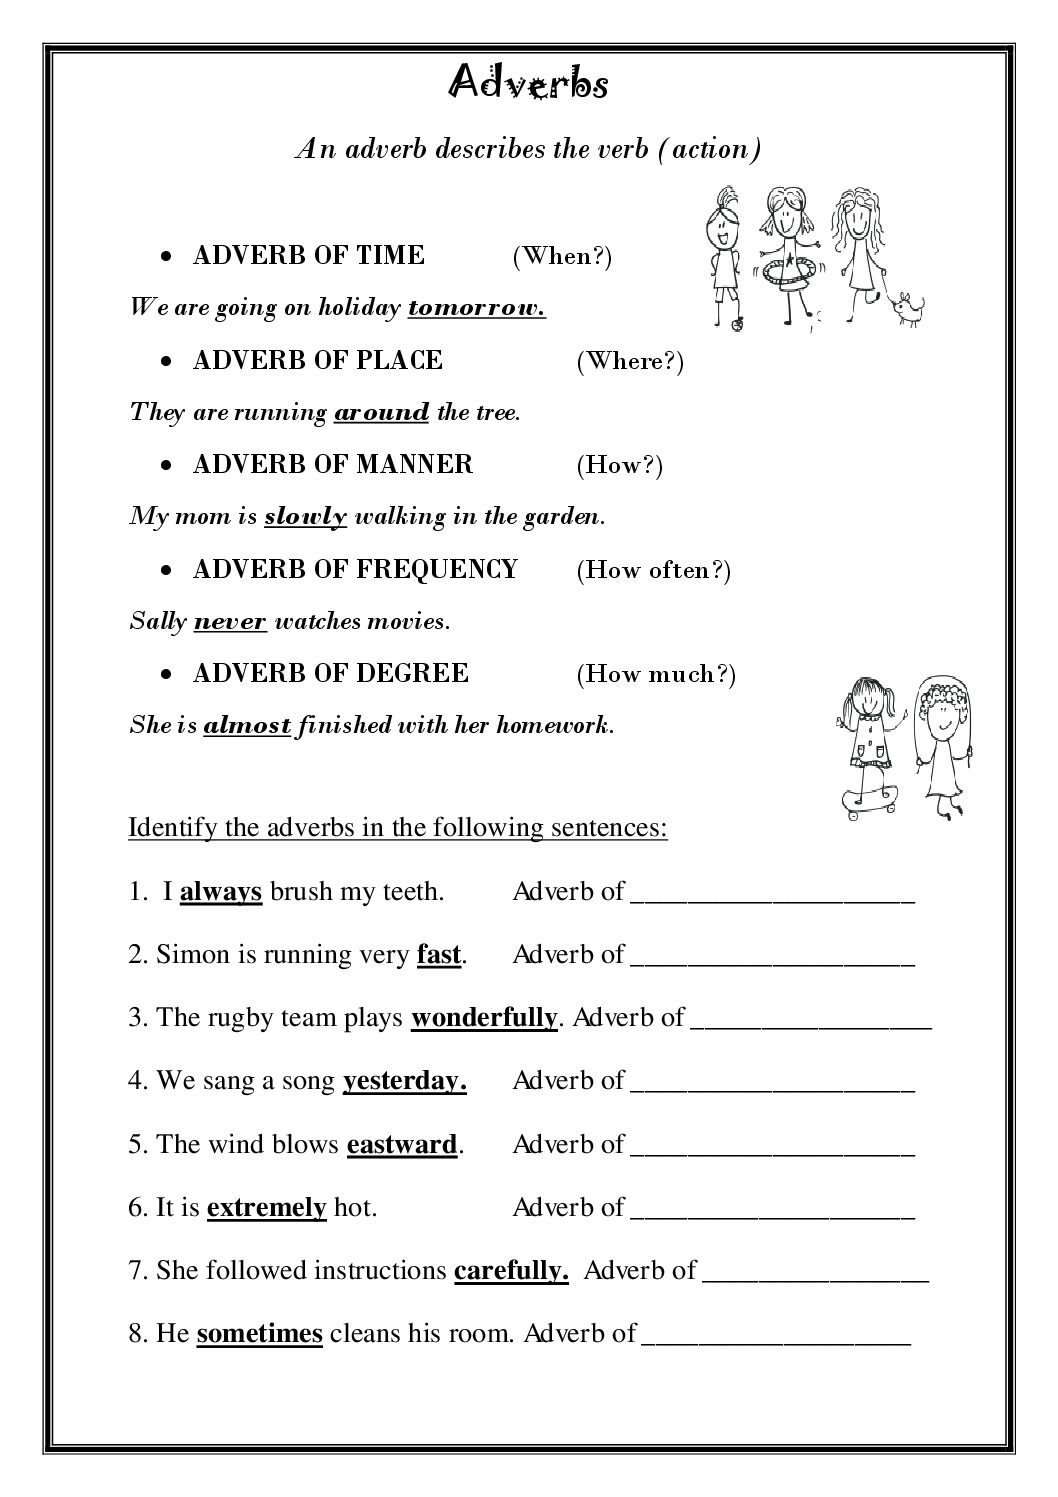 Adverbs Worksheet For 3rd Grade